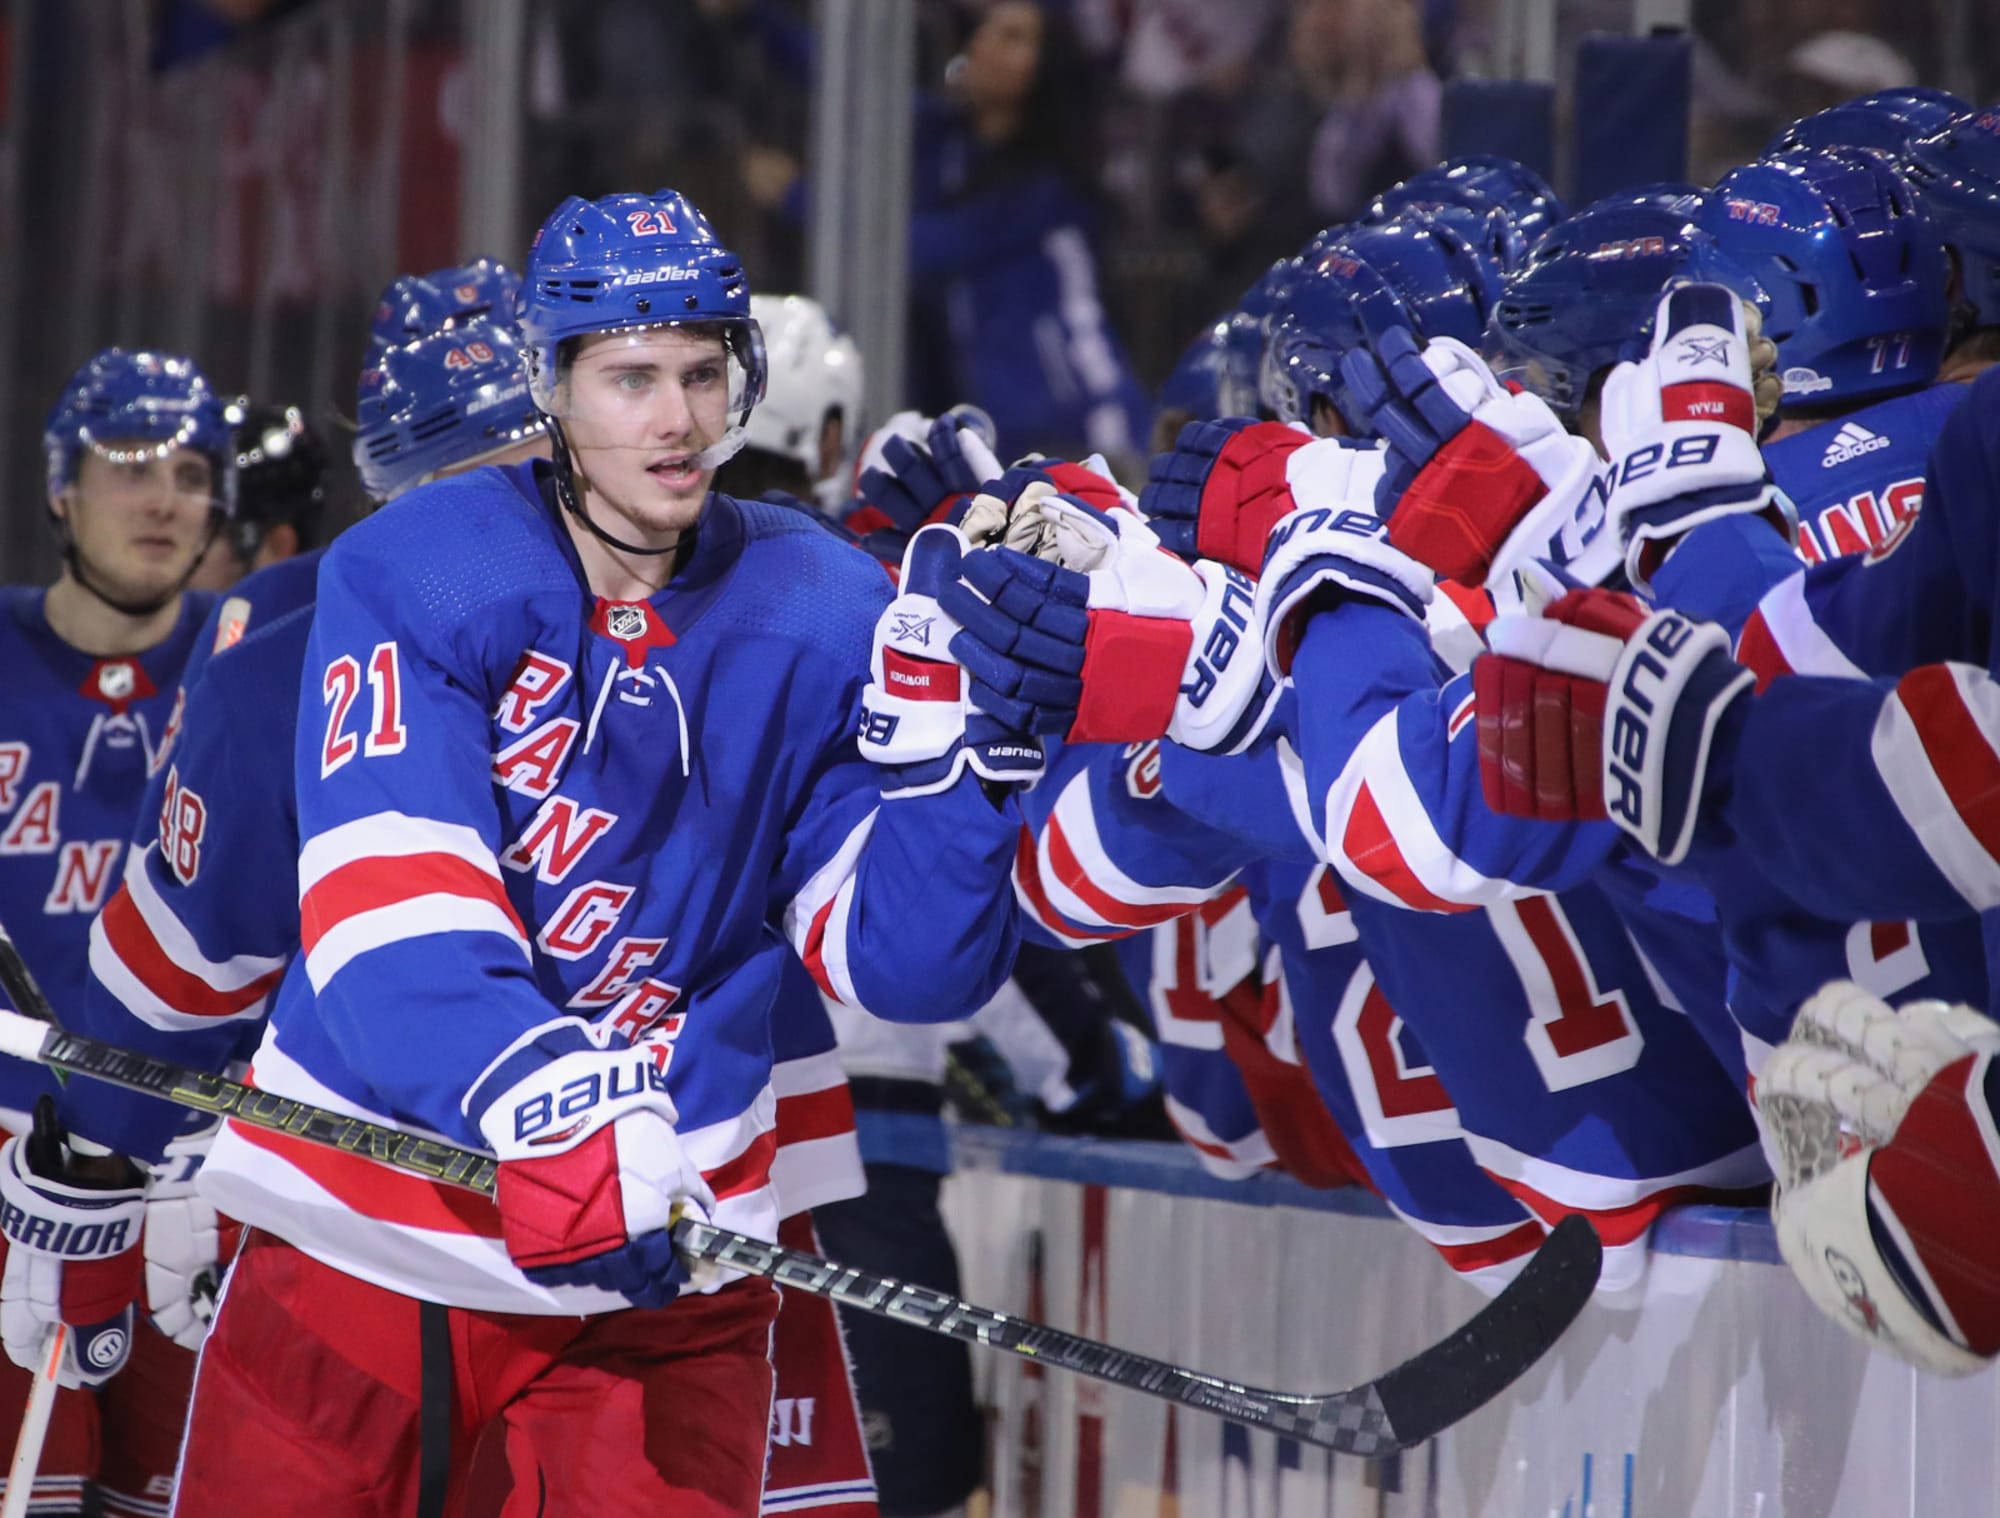 How do the New York Rangers stack up in the improving Metro Division